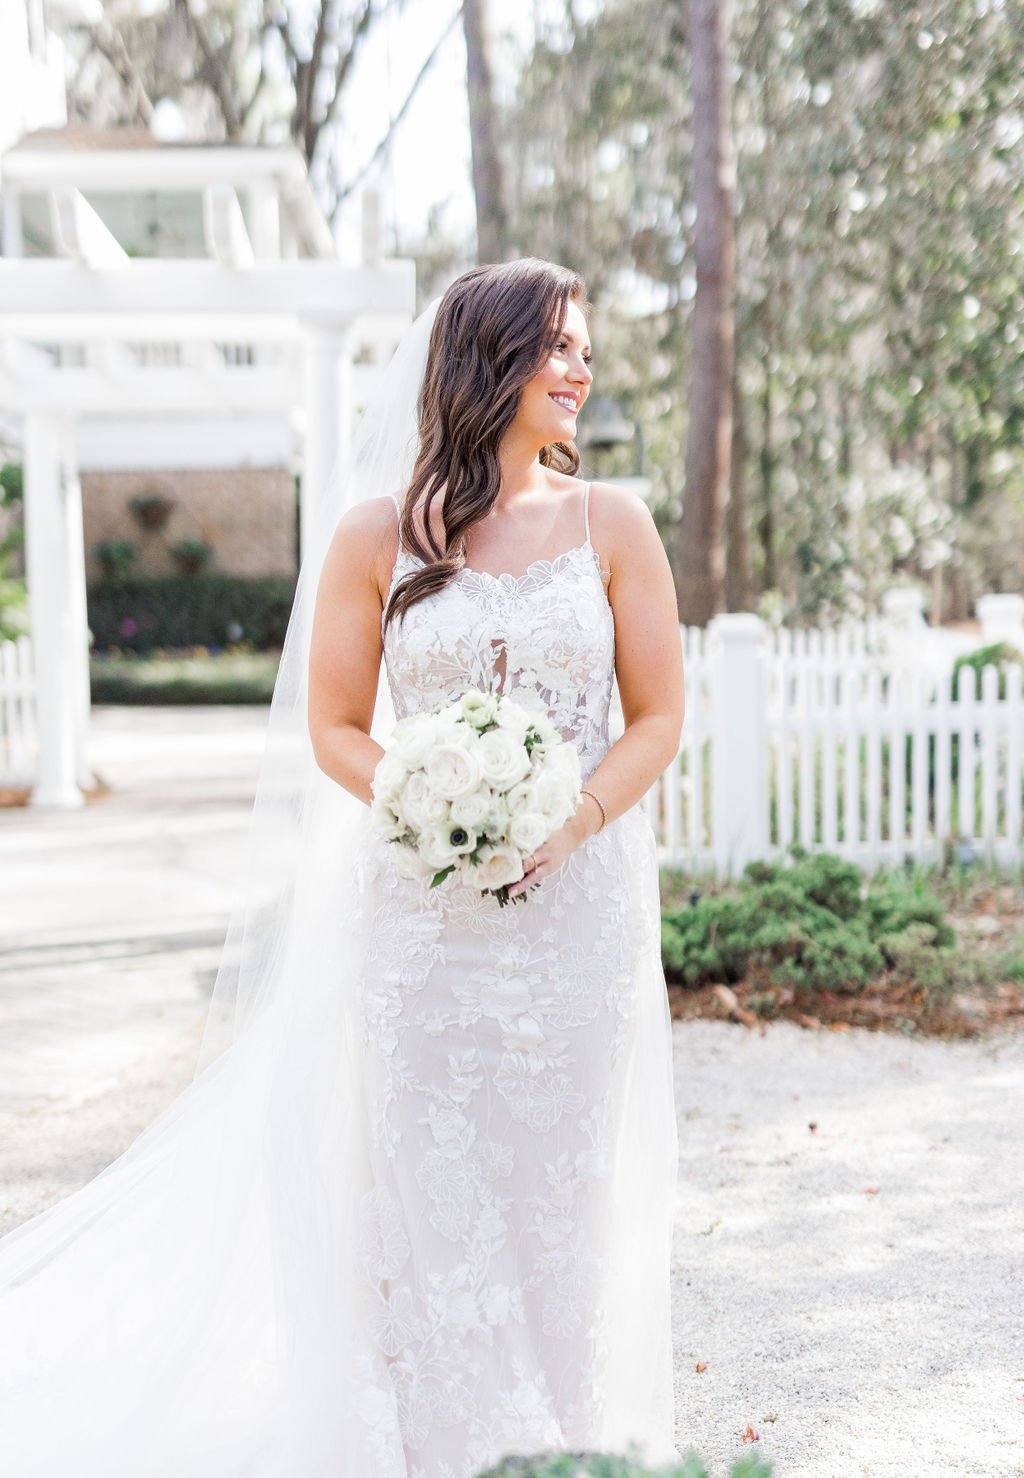 rachel-and-jarrods-classic-white-wedding-florals-designed-by-savannah-florist-ivory-and-beau-for-elegant-wedding-at-the-mackey-house-1.JPG